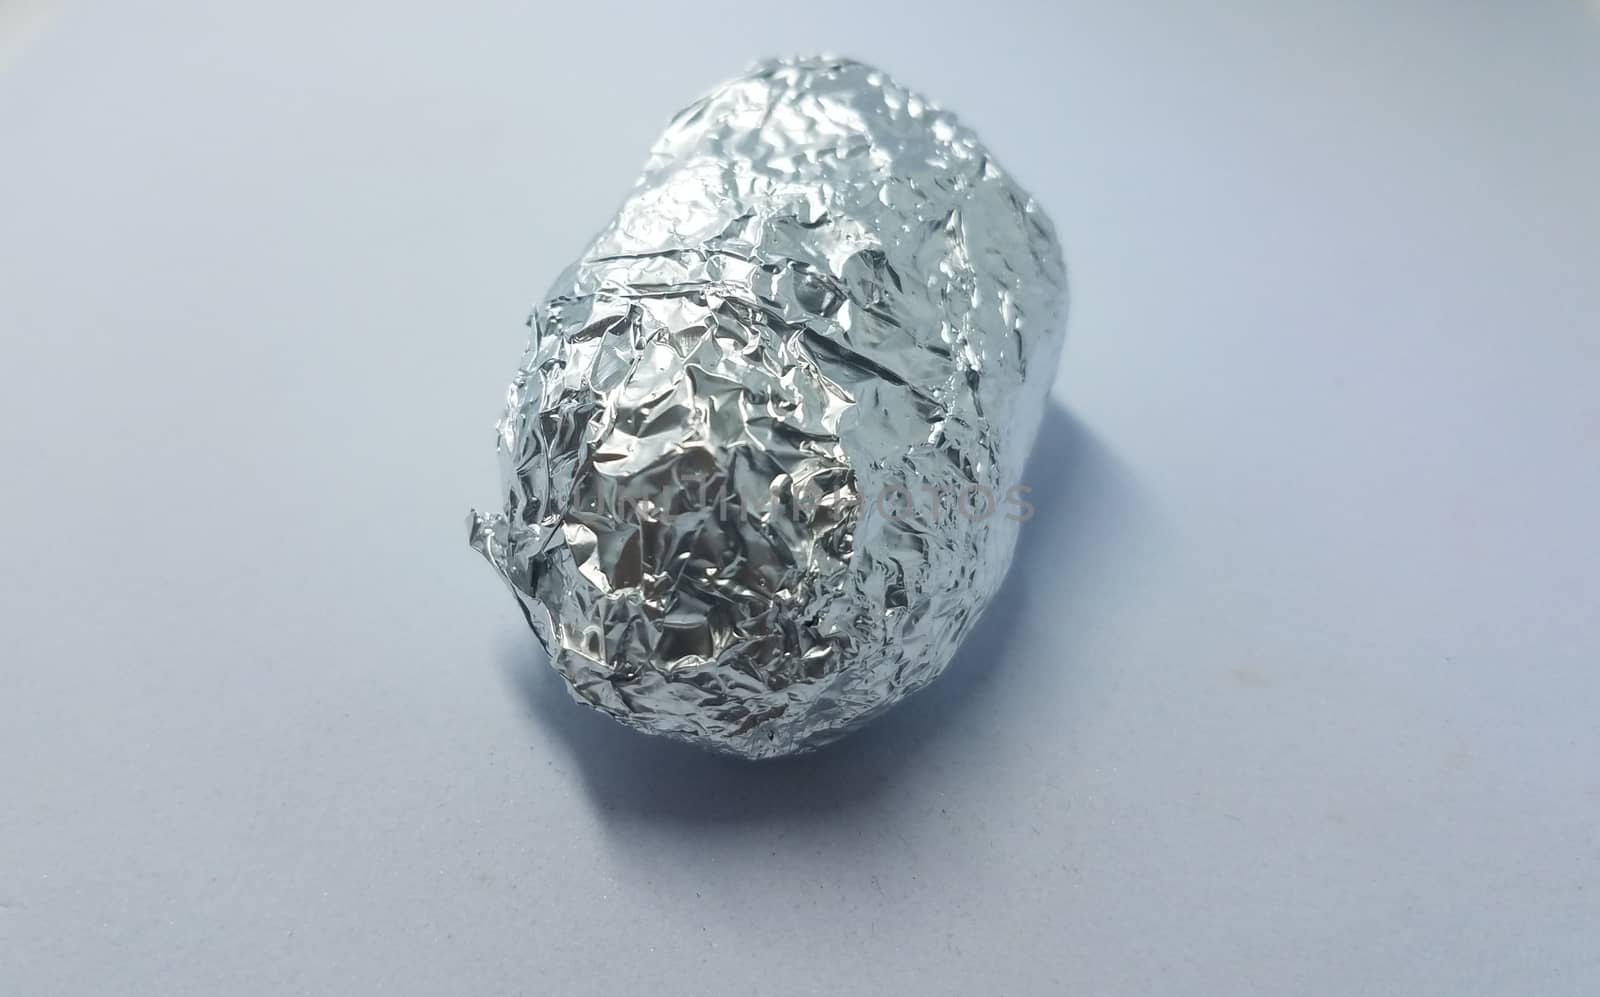 object wrapped in metal foil on white background